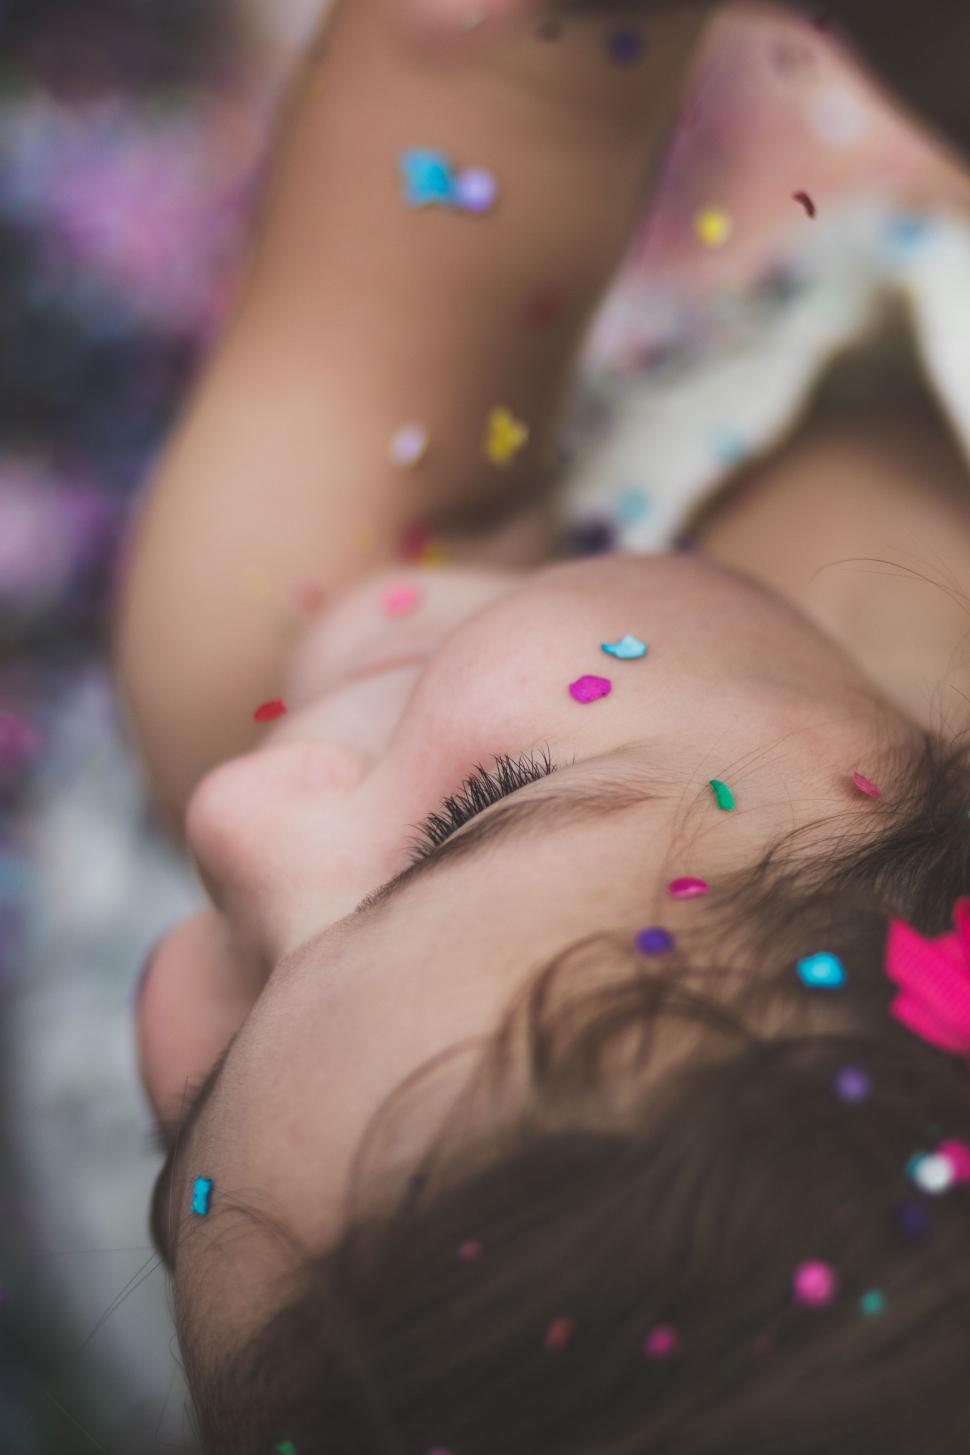 Free Image of Little Girl Laying on Bed Covered in Confetti 